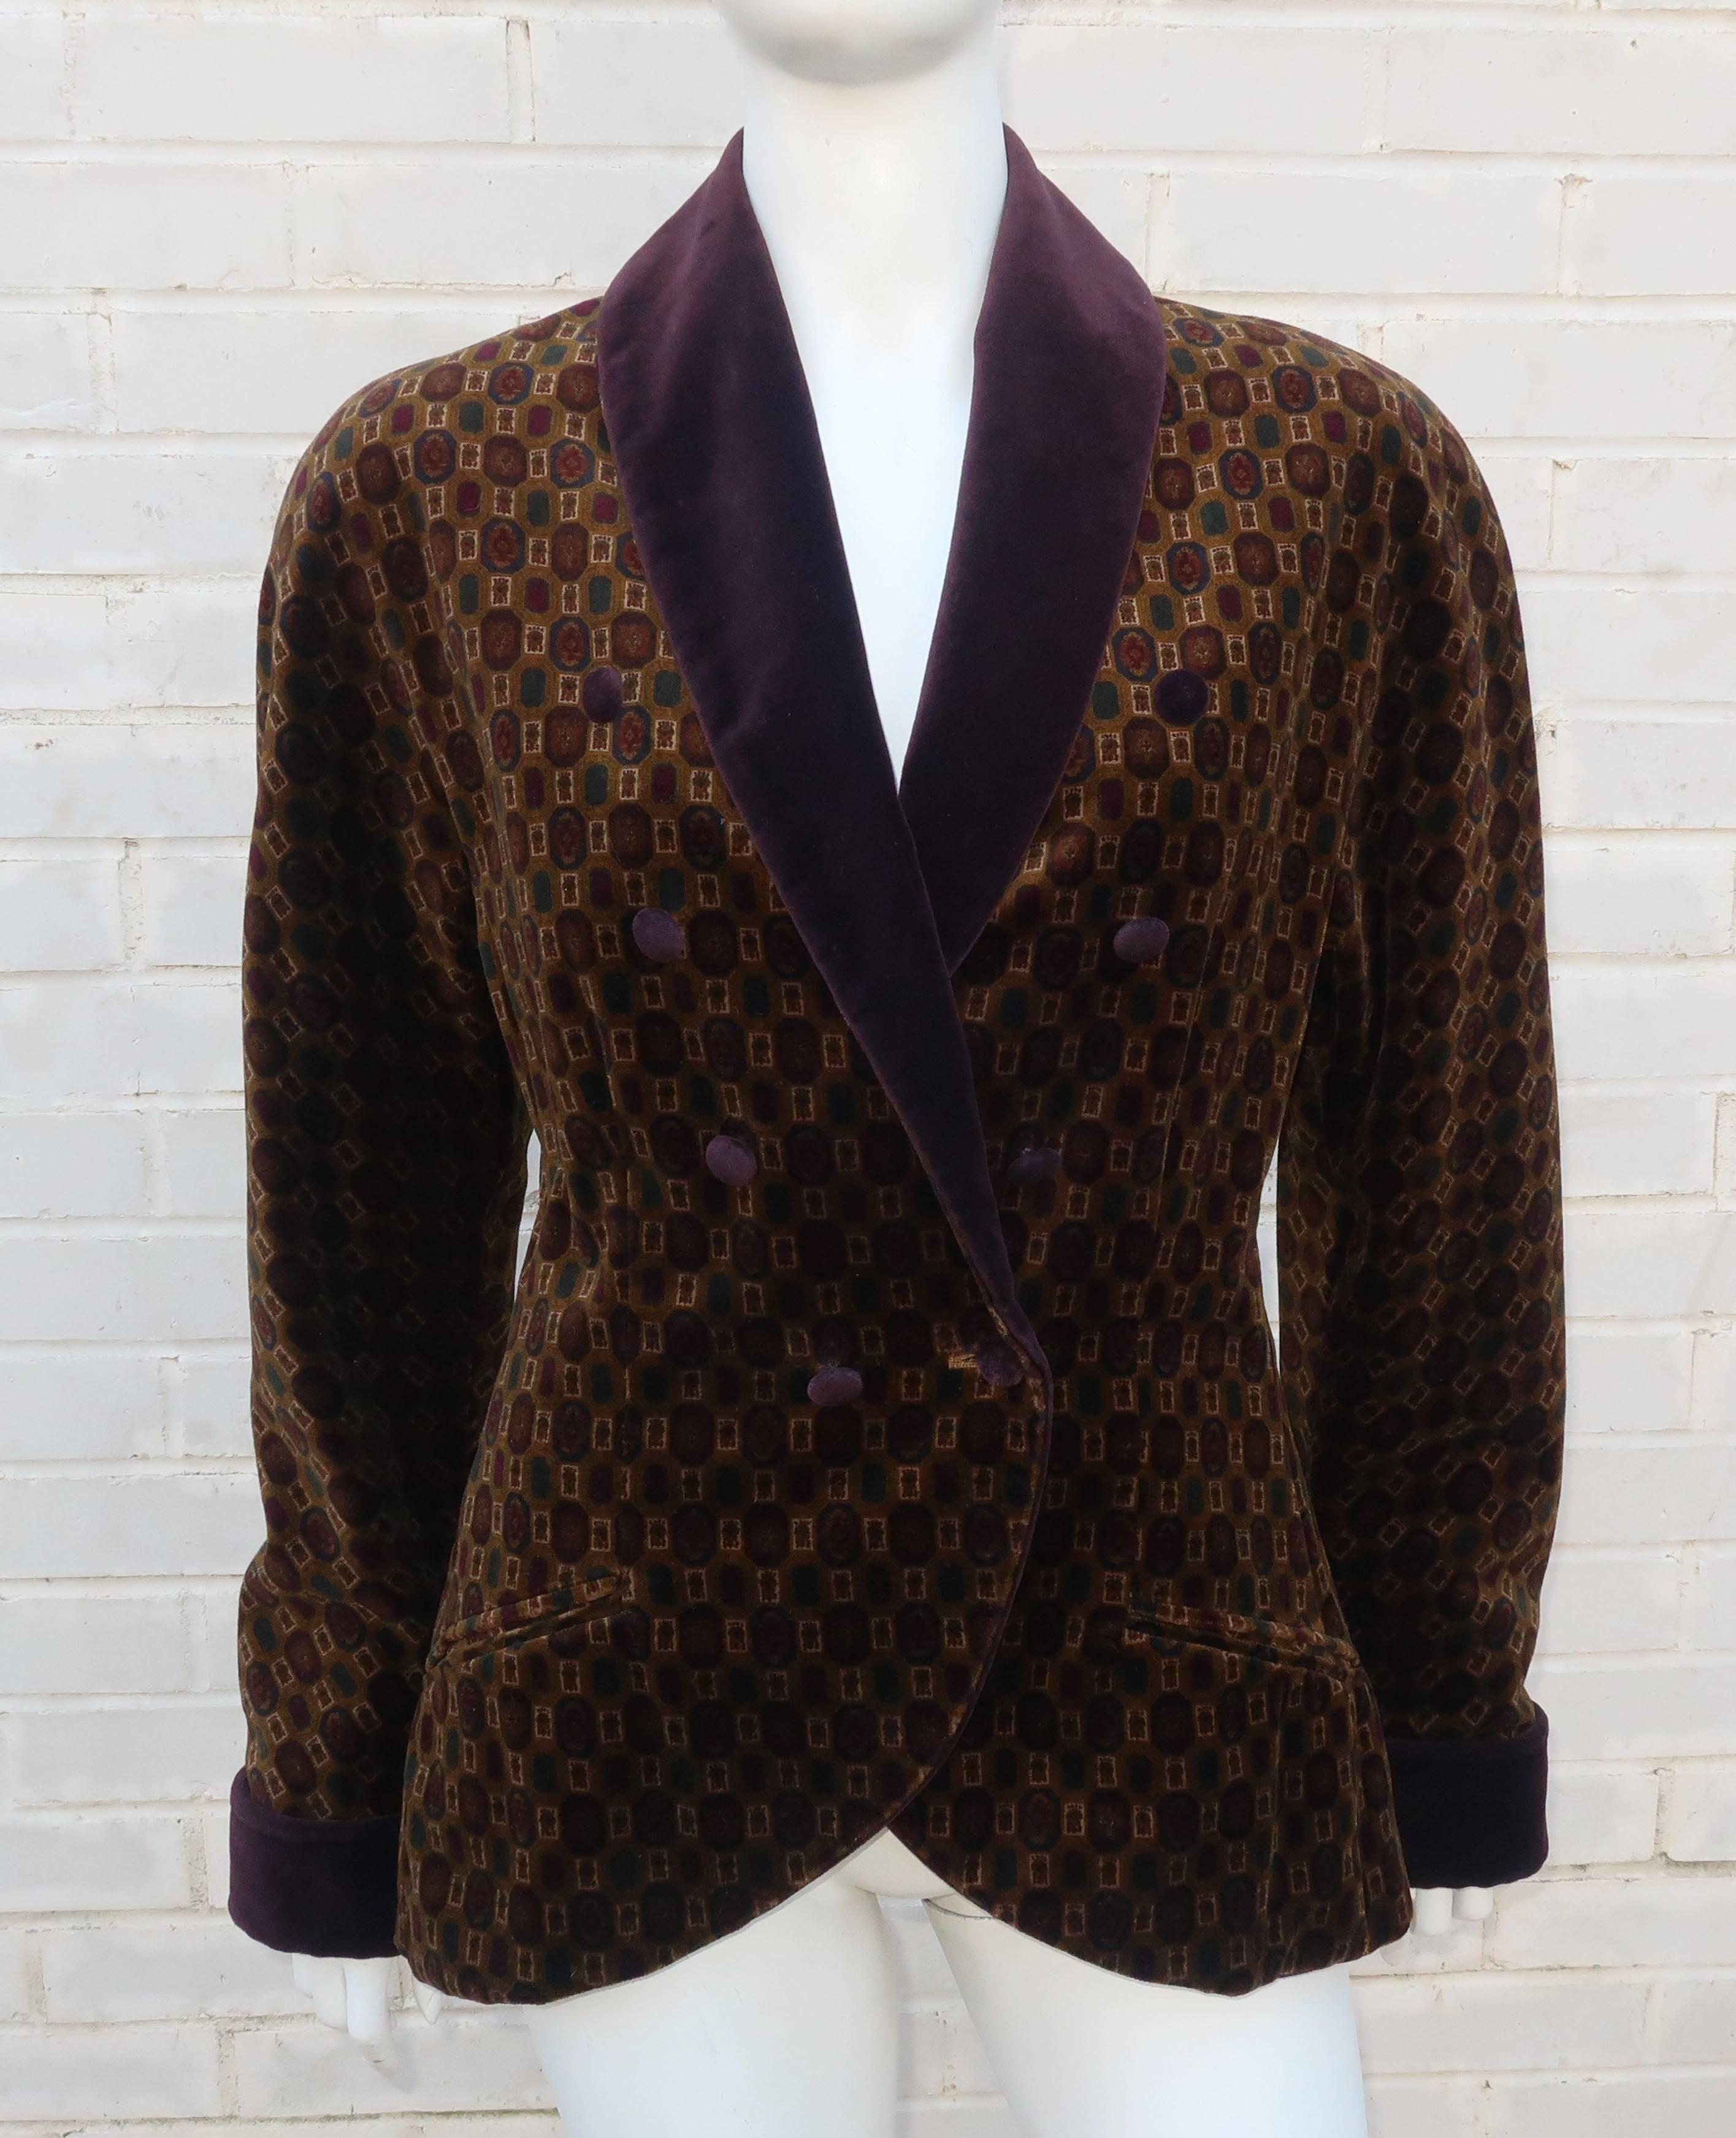 Prepare for an evening by the fire with Genny’s feminine spin on the classic smoking jacket.  The 1980’s cotton velvet silhouette features a modified shawl collar and upturned cuffs in deep plum and a double breasted body in an old world pattern of